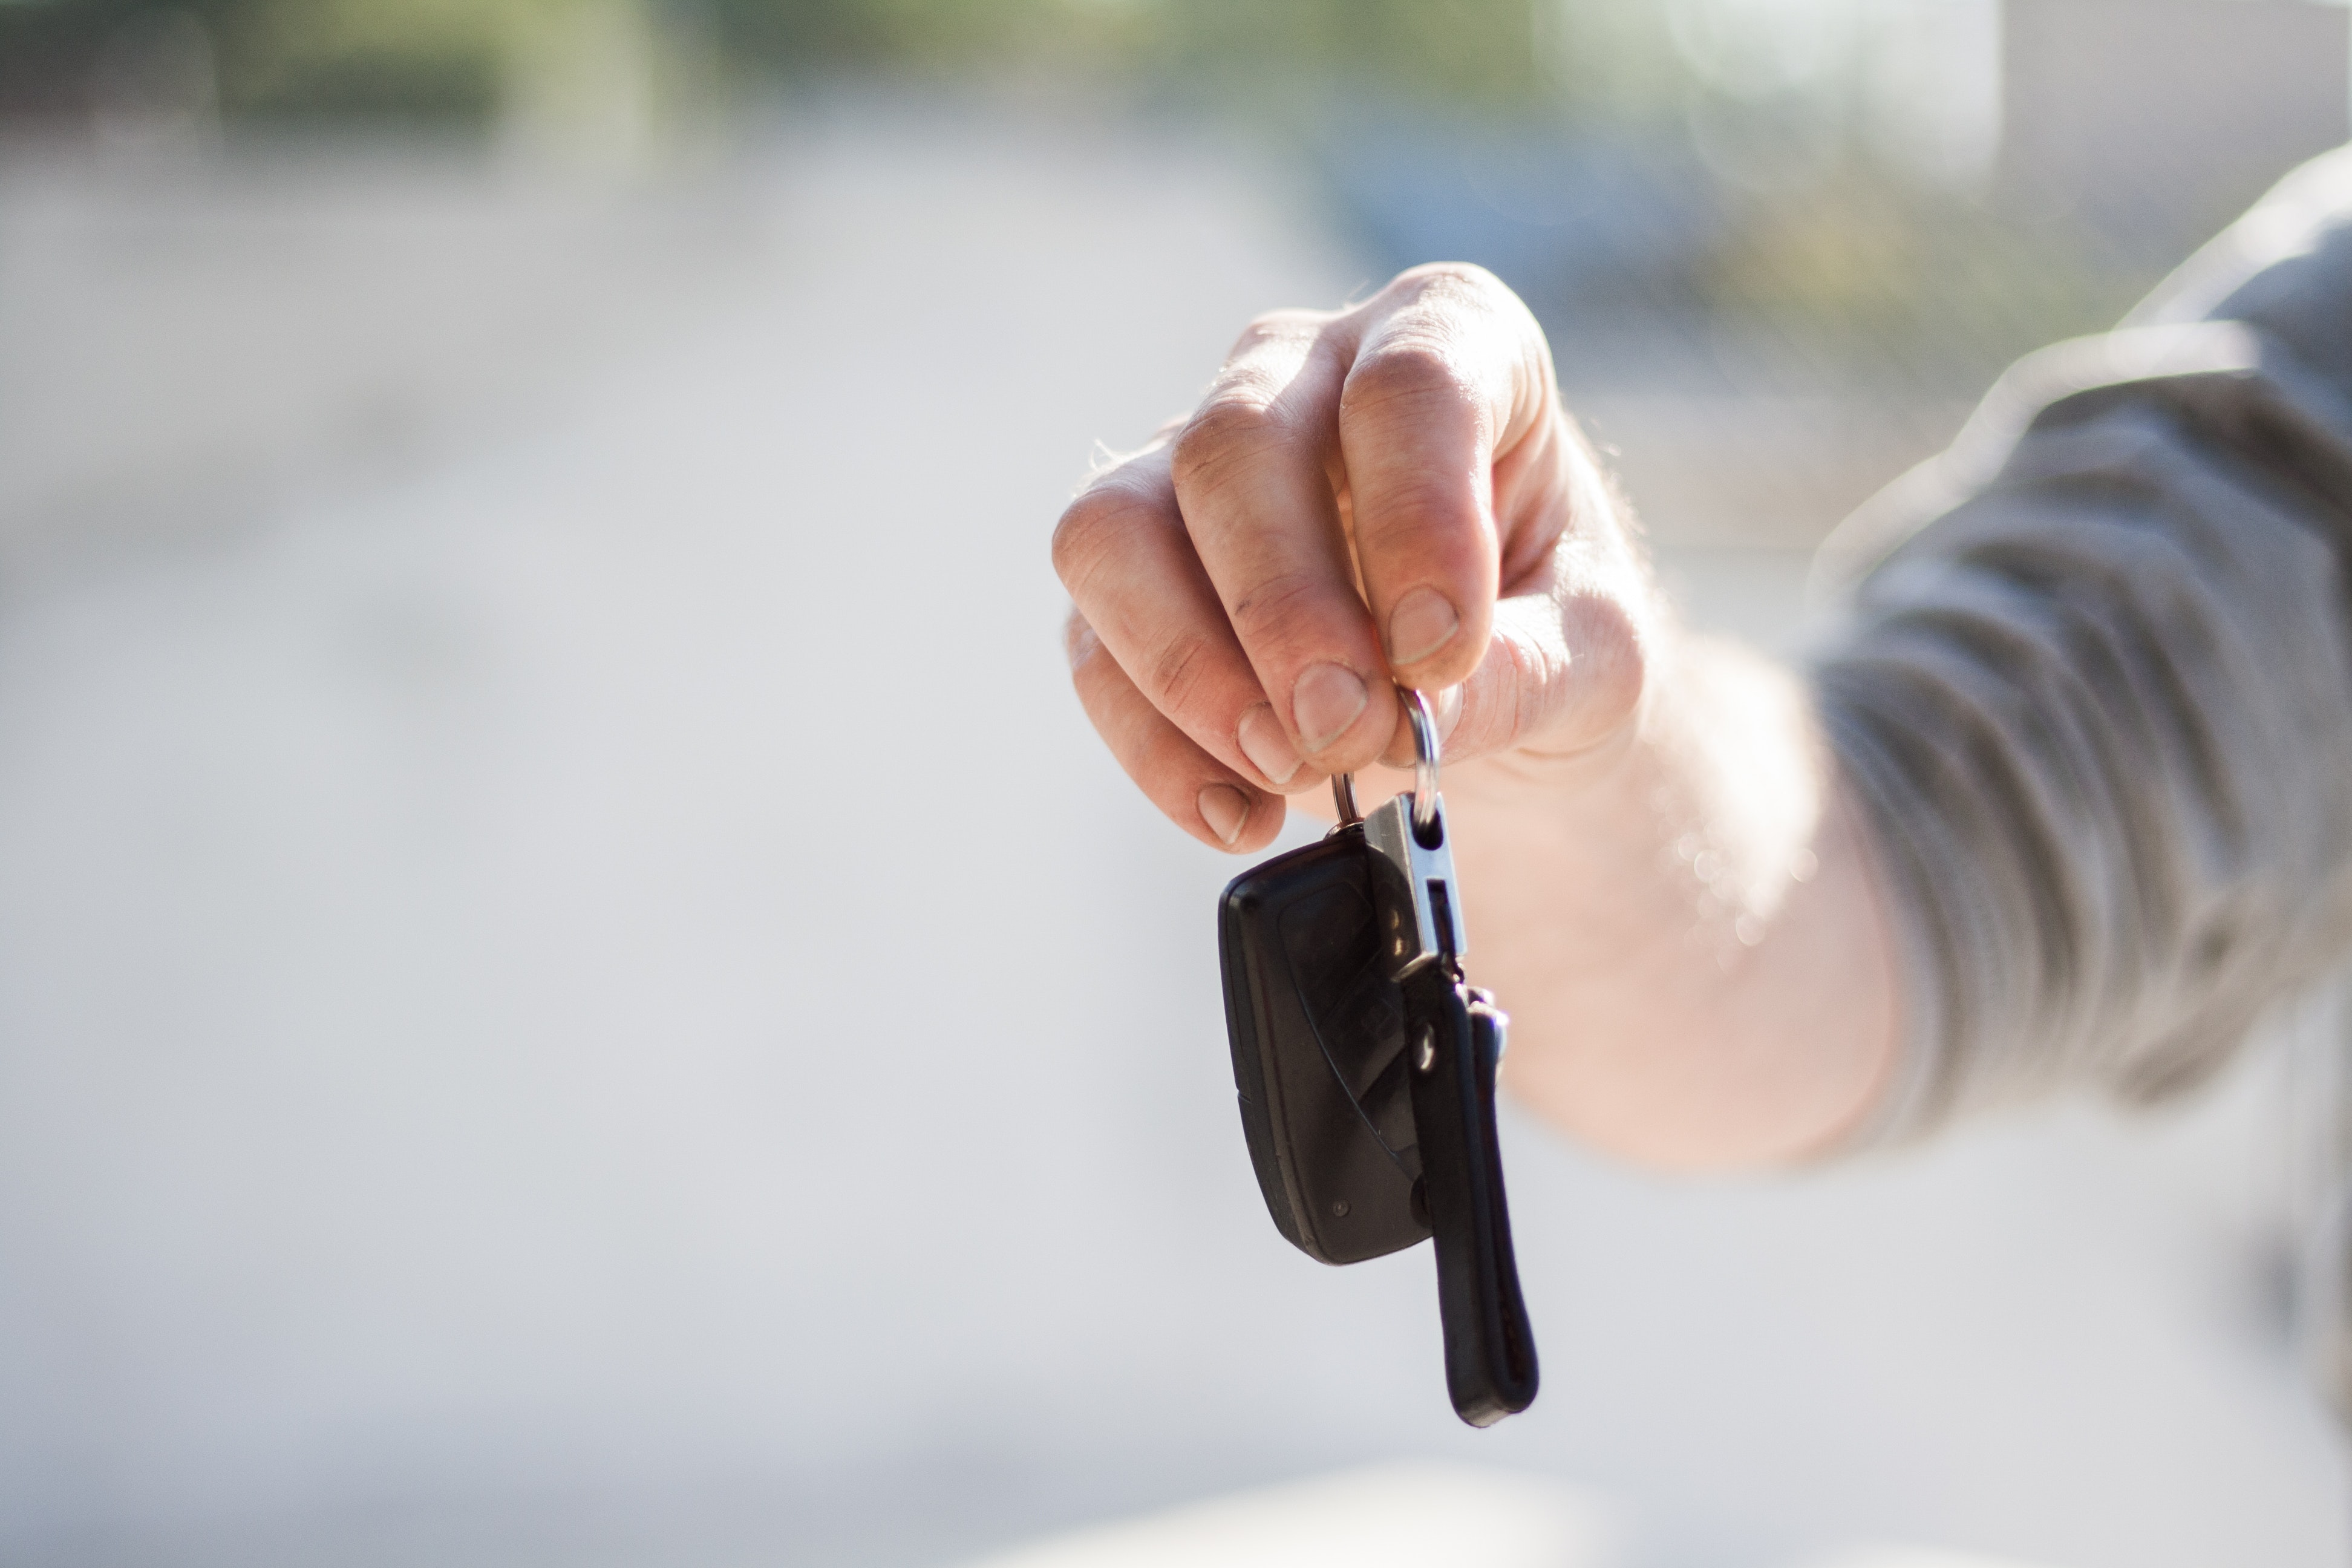 How To Set Up A Car Dealership From Home? A Complete Guide.